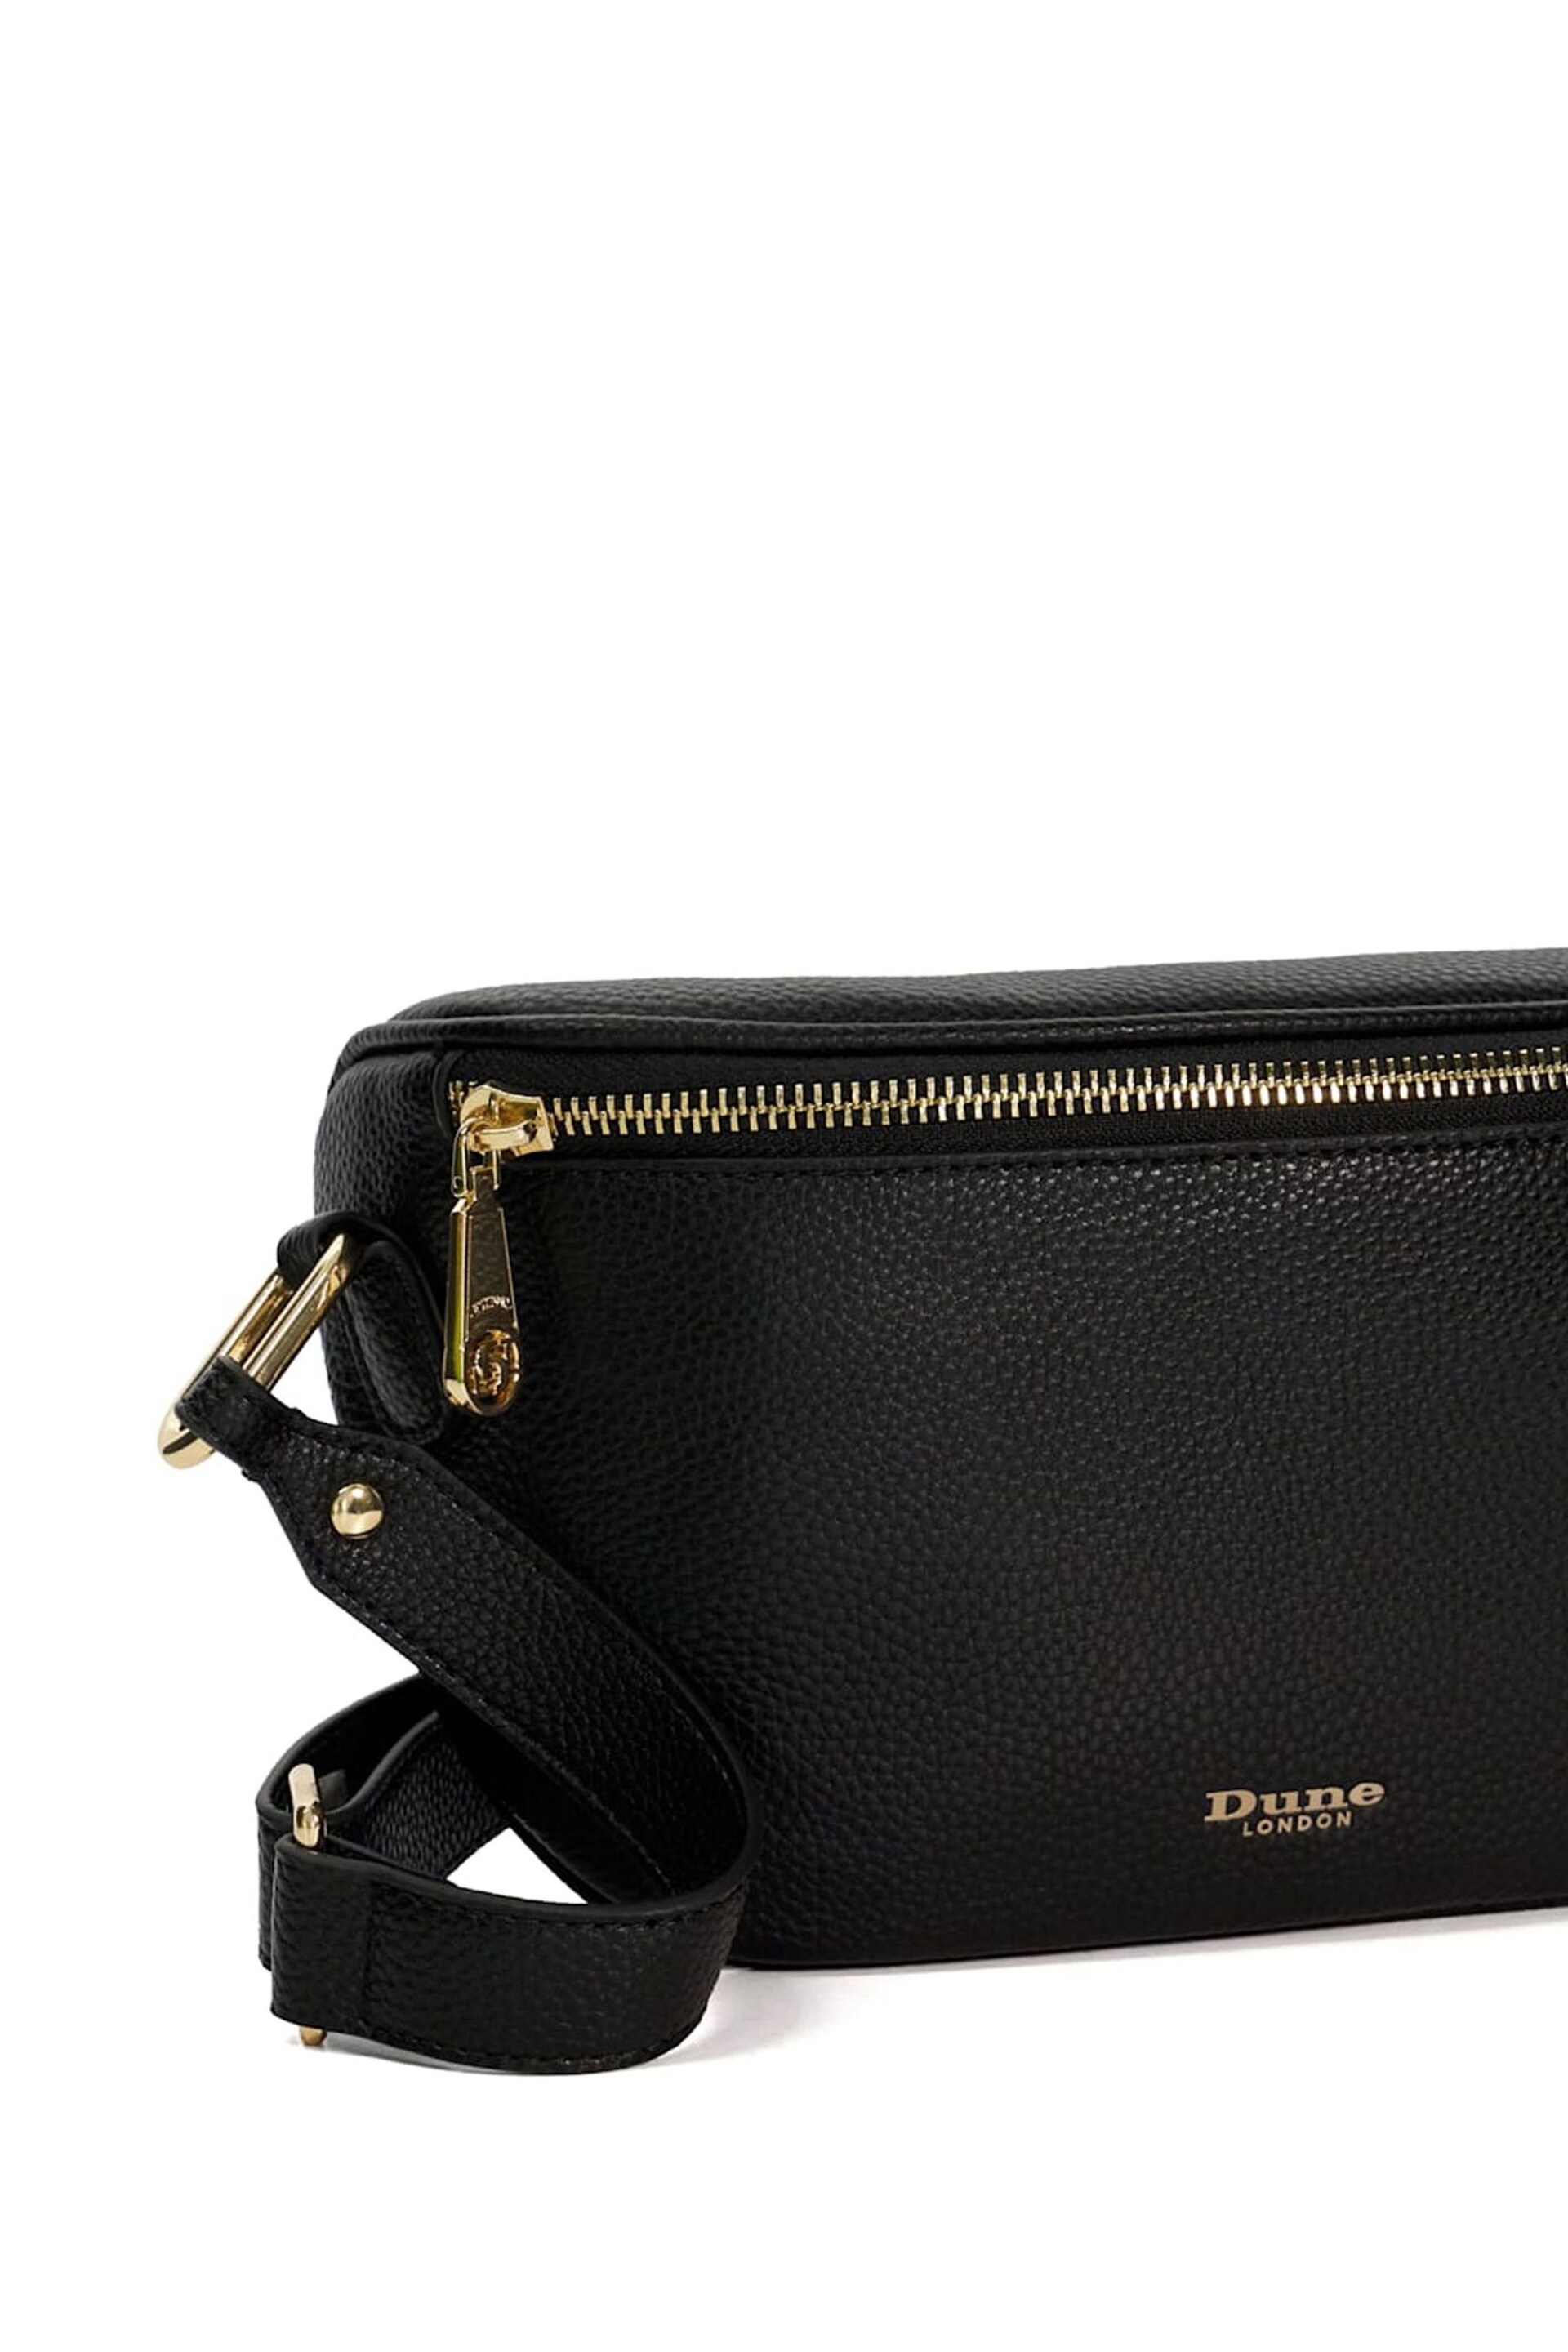 Dune London Black Small Dent Curved Cross-Body Bag - Image 6 of 6